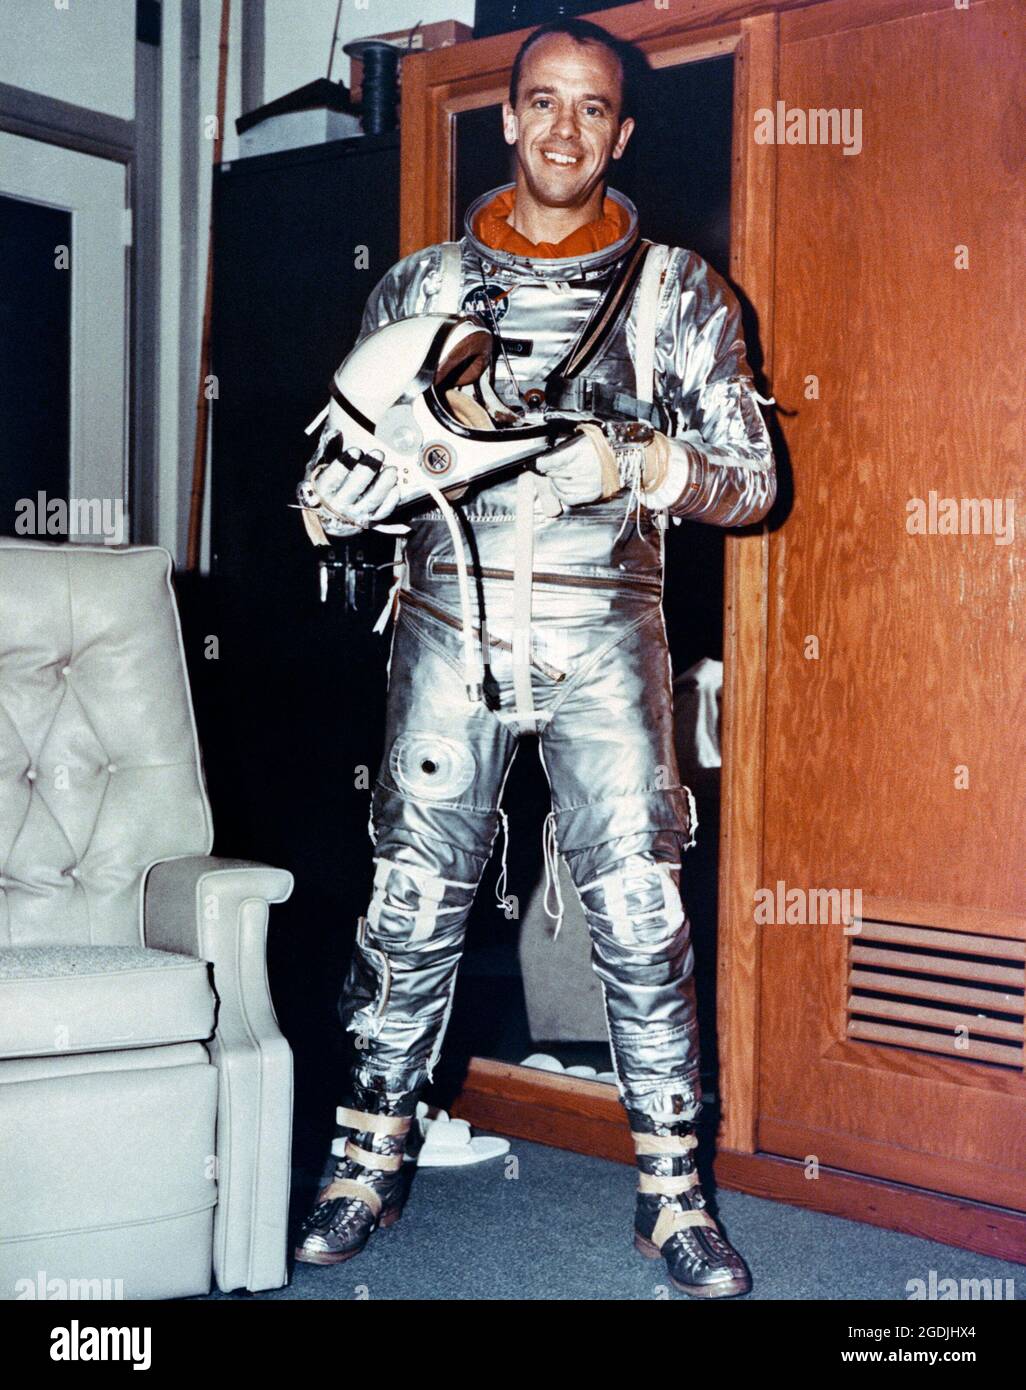 Astronaut Alan Shepard, dressed in his spacesuit,prior to his launch in a Mercury-Redstone 3 (MR-3) spacecraft from Cape Canaveral. He was the first American in space, 23 days after Yuri Gagarin, on mission Freedom 7. Stock Photo